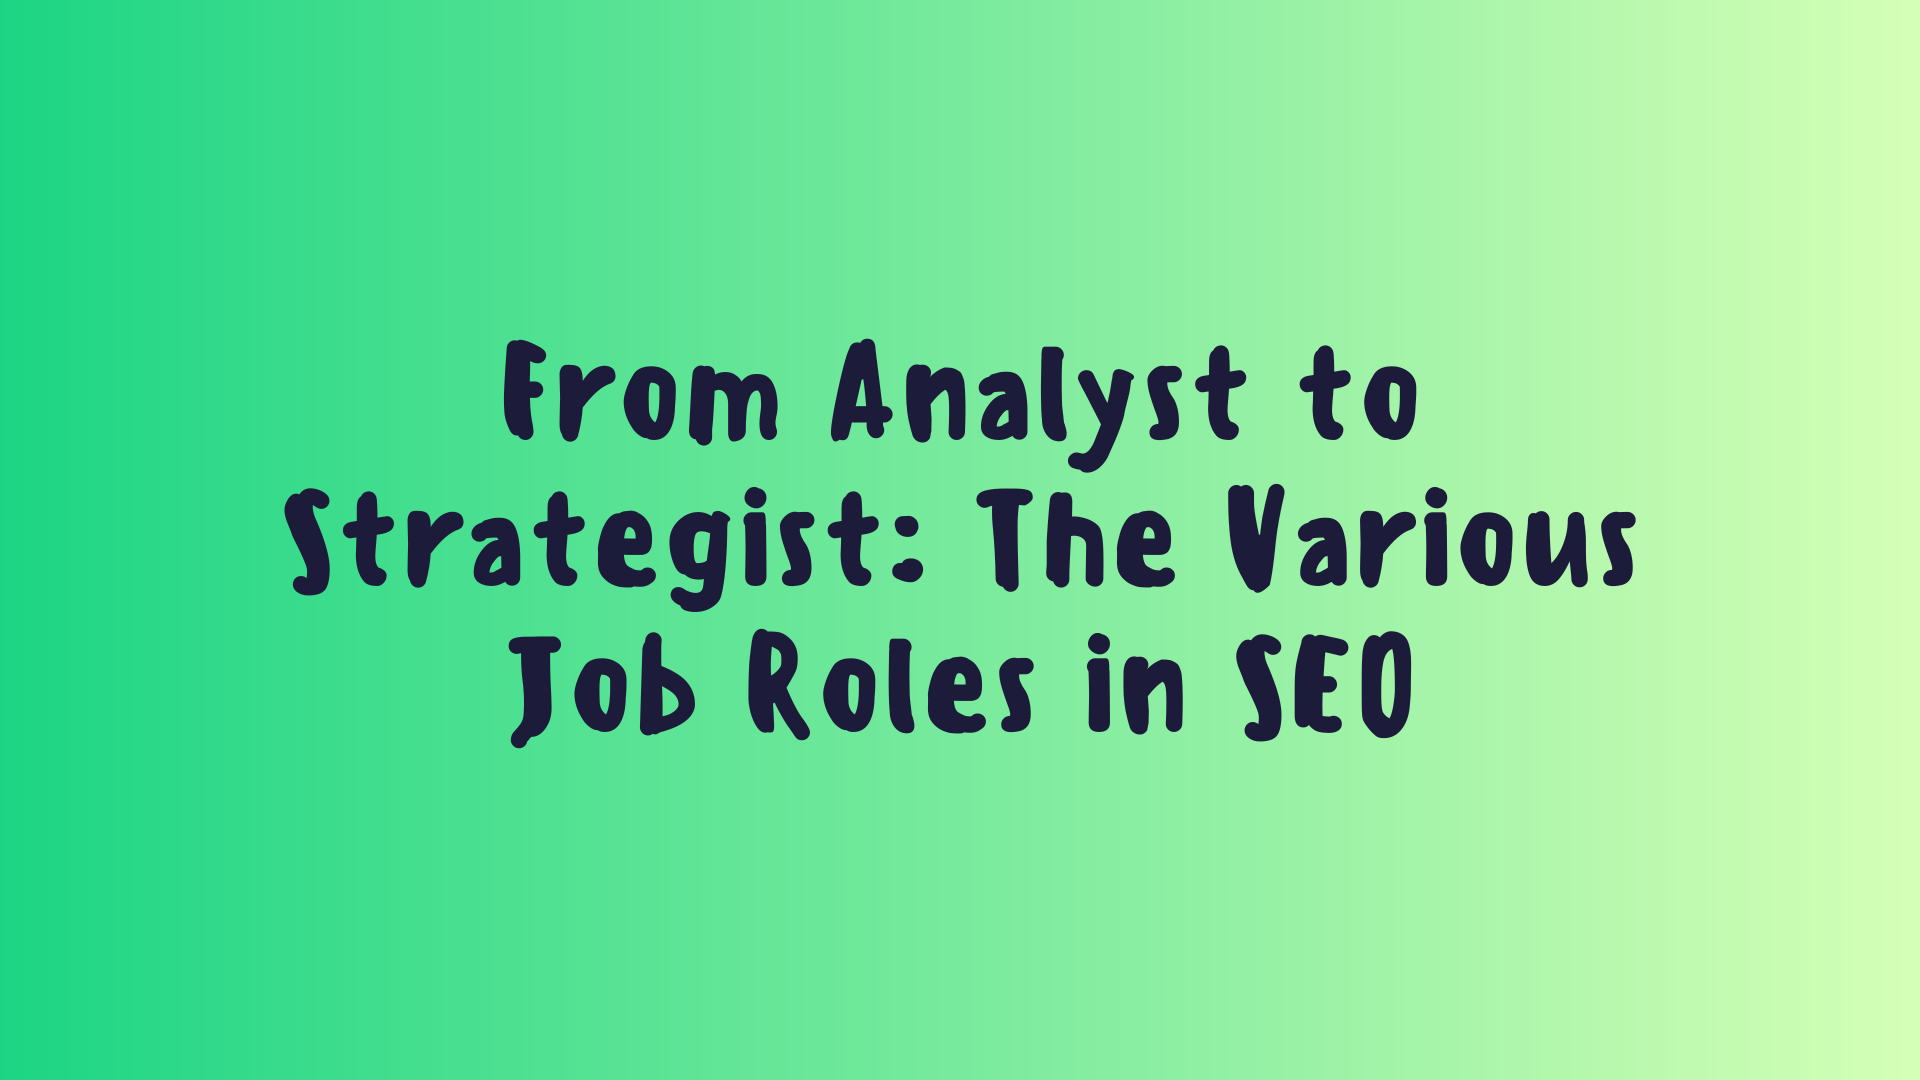 From Analyst to Strategist: The Various Job Roles in SEO